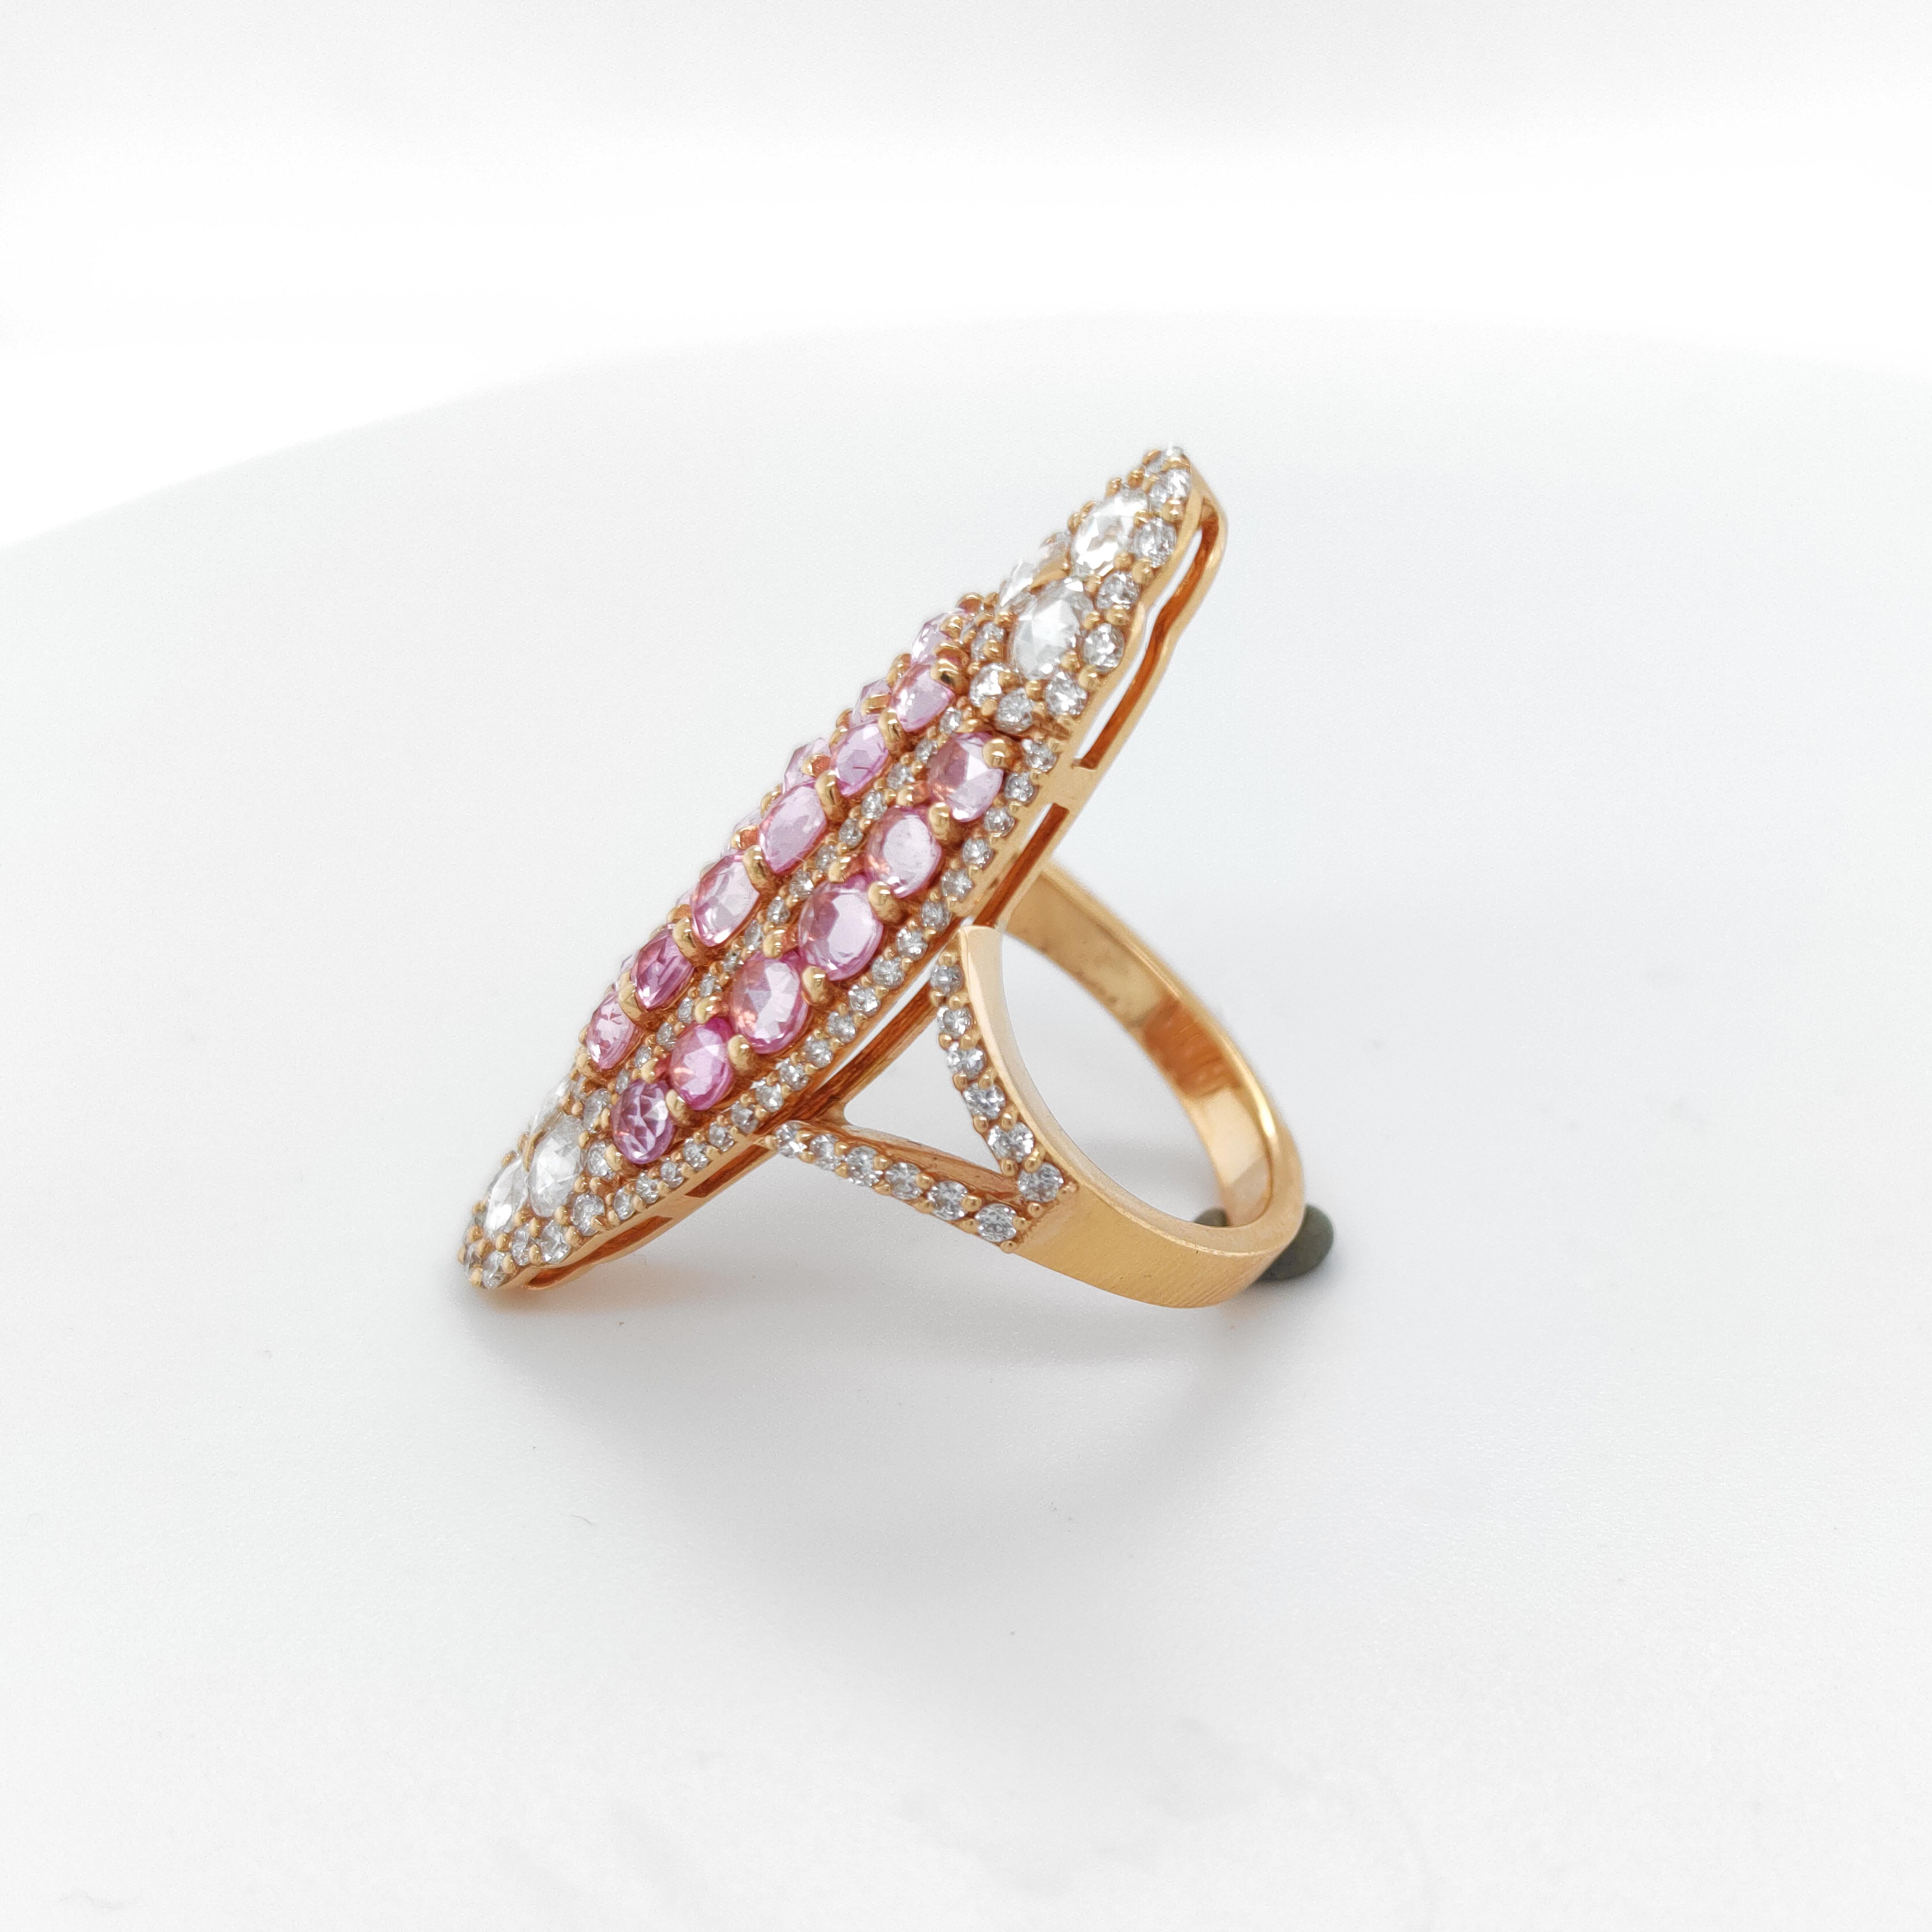 Brilliant Cut Cocktail ring in 18Kt White Gold, 1, 75 cts Diamonds & 2, 35 cts Pink Sapphires For Sale